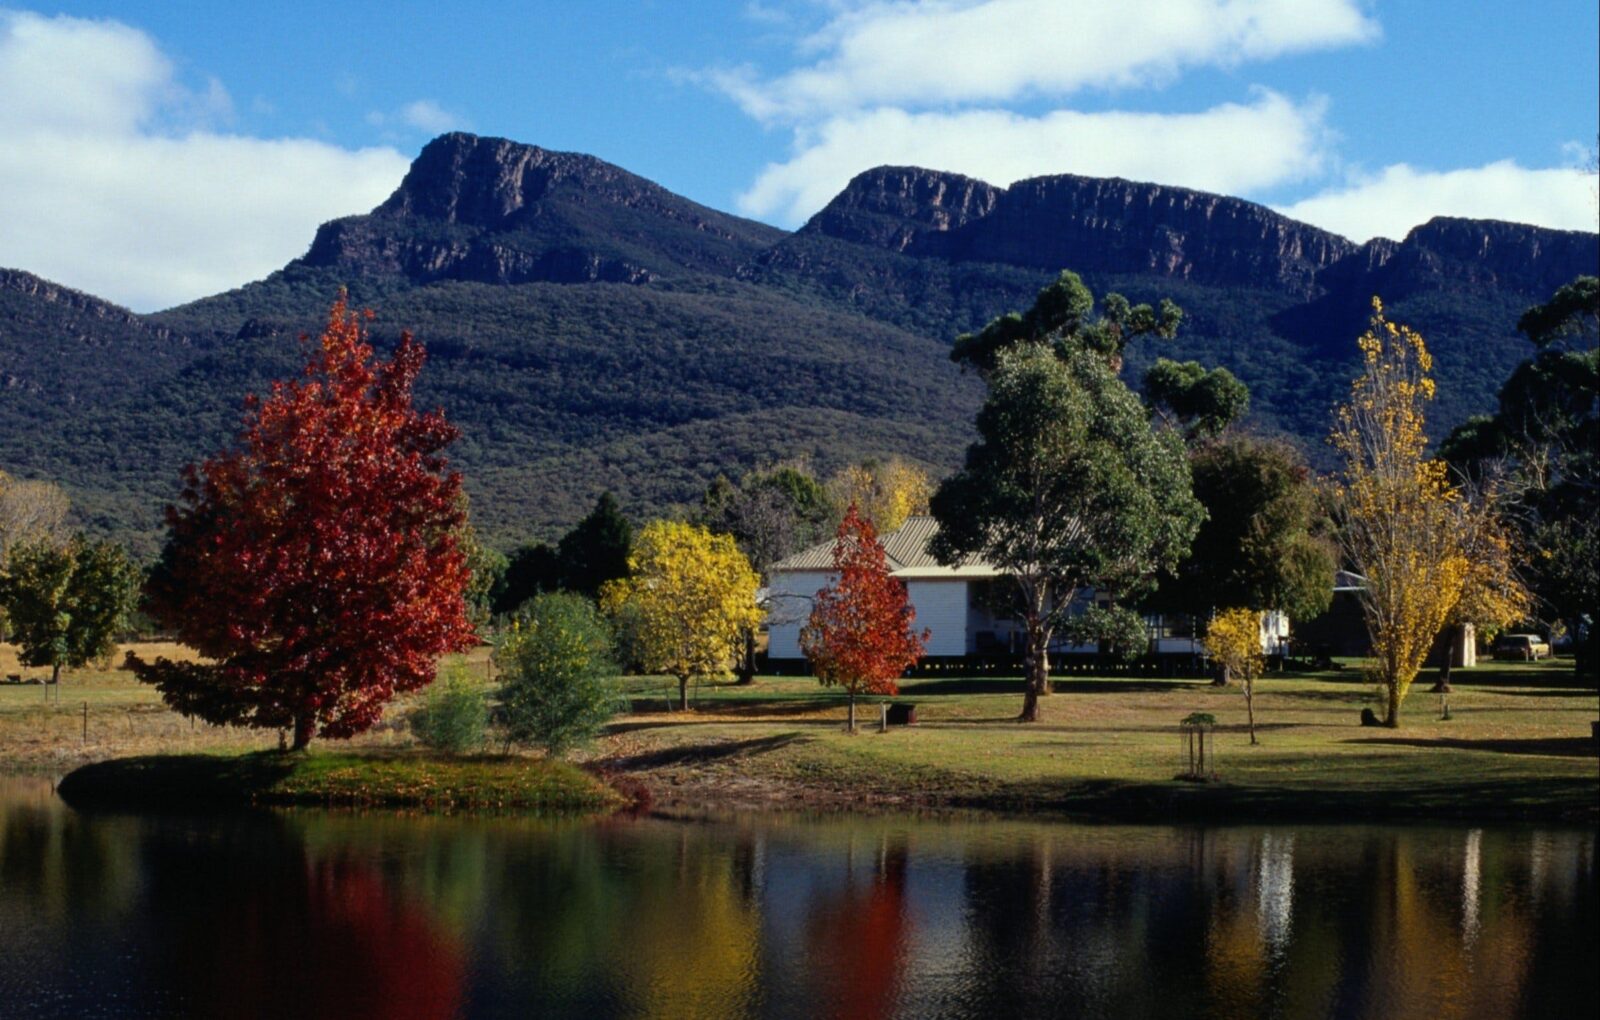 Autumn colours and the Grampians thrid highest mountain, Redman Bluff from Grampians Paradise